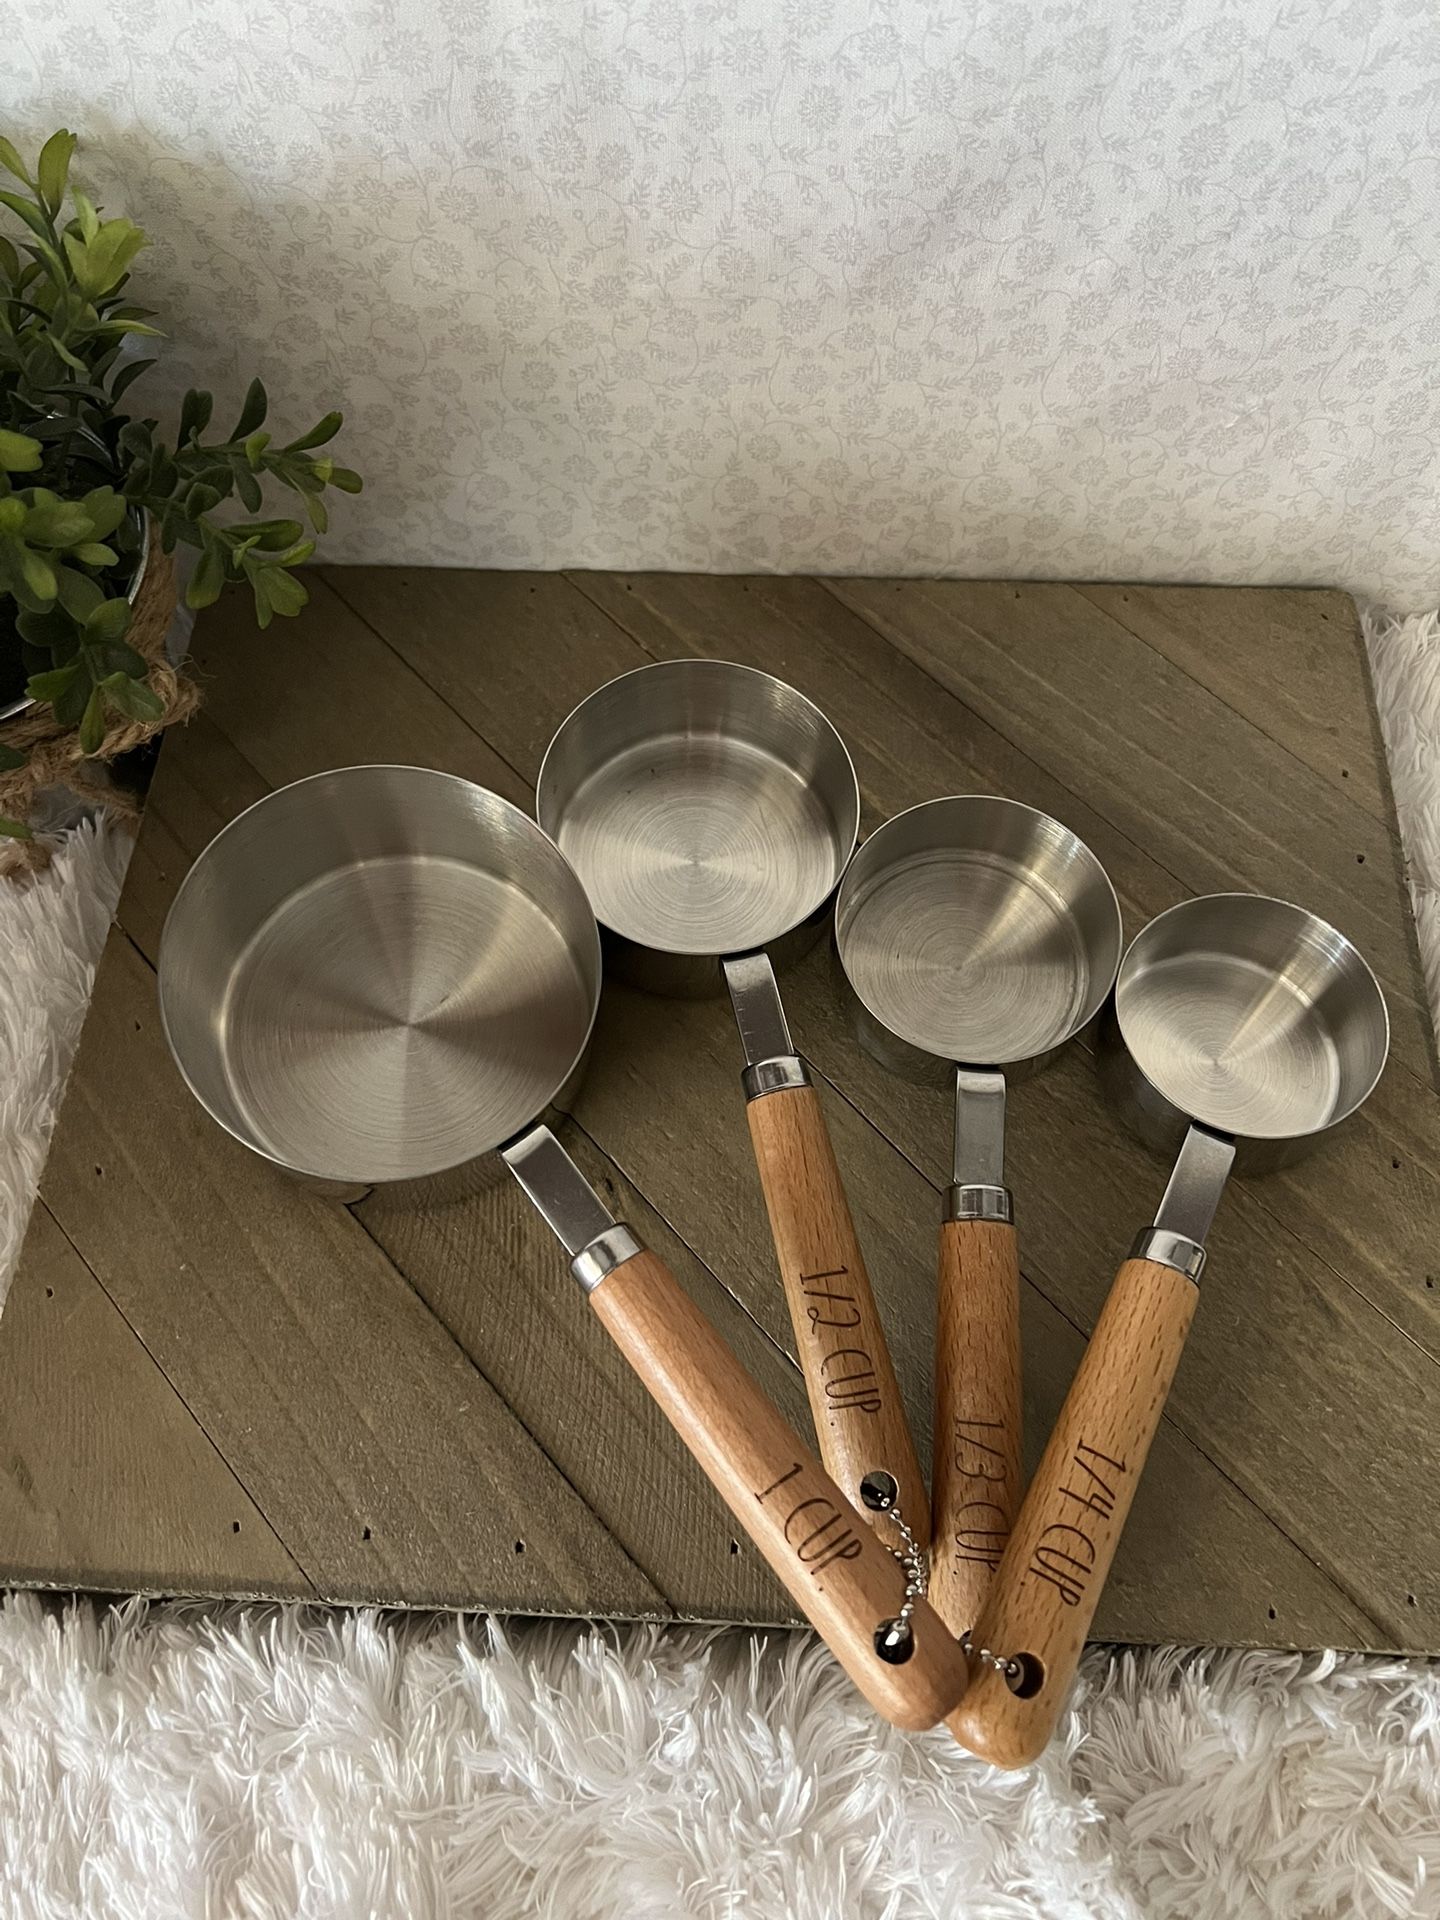 Rae Dunn Measuring Cups for Sale in El Paso, TX - OfferUp